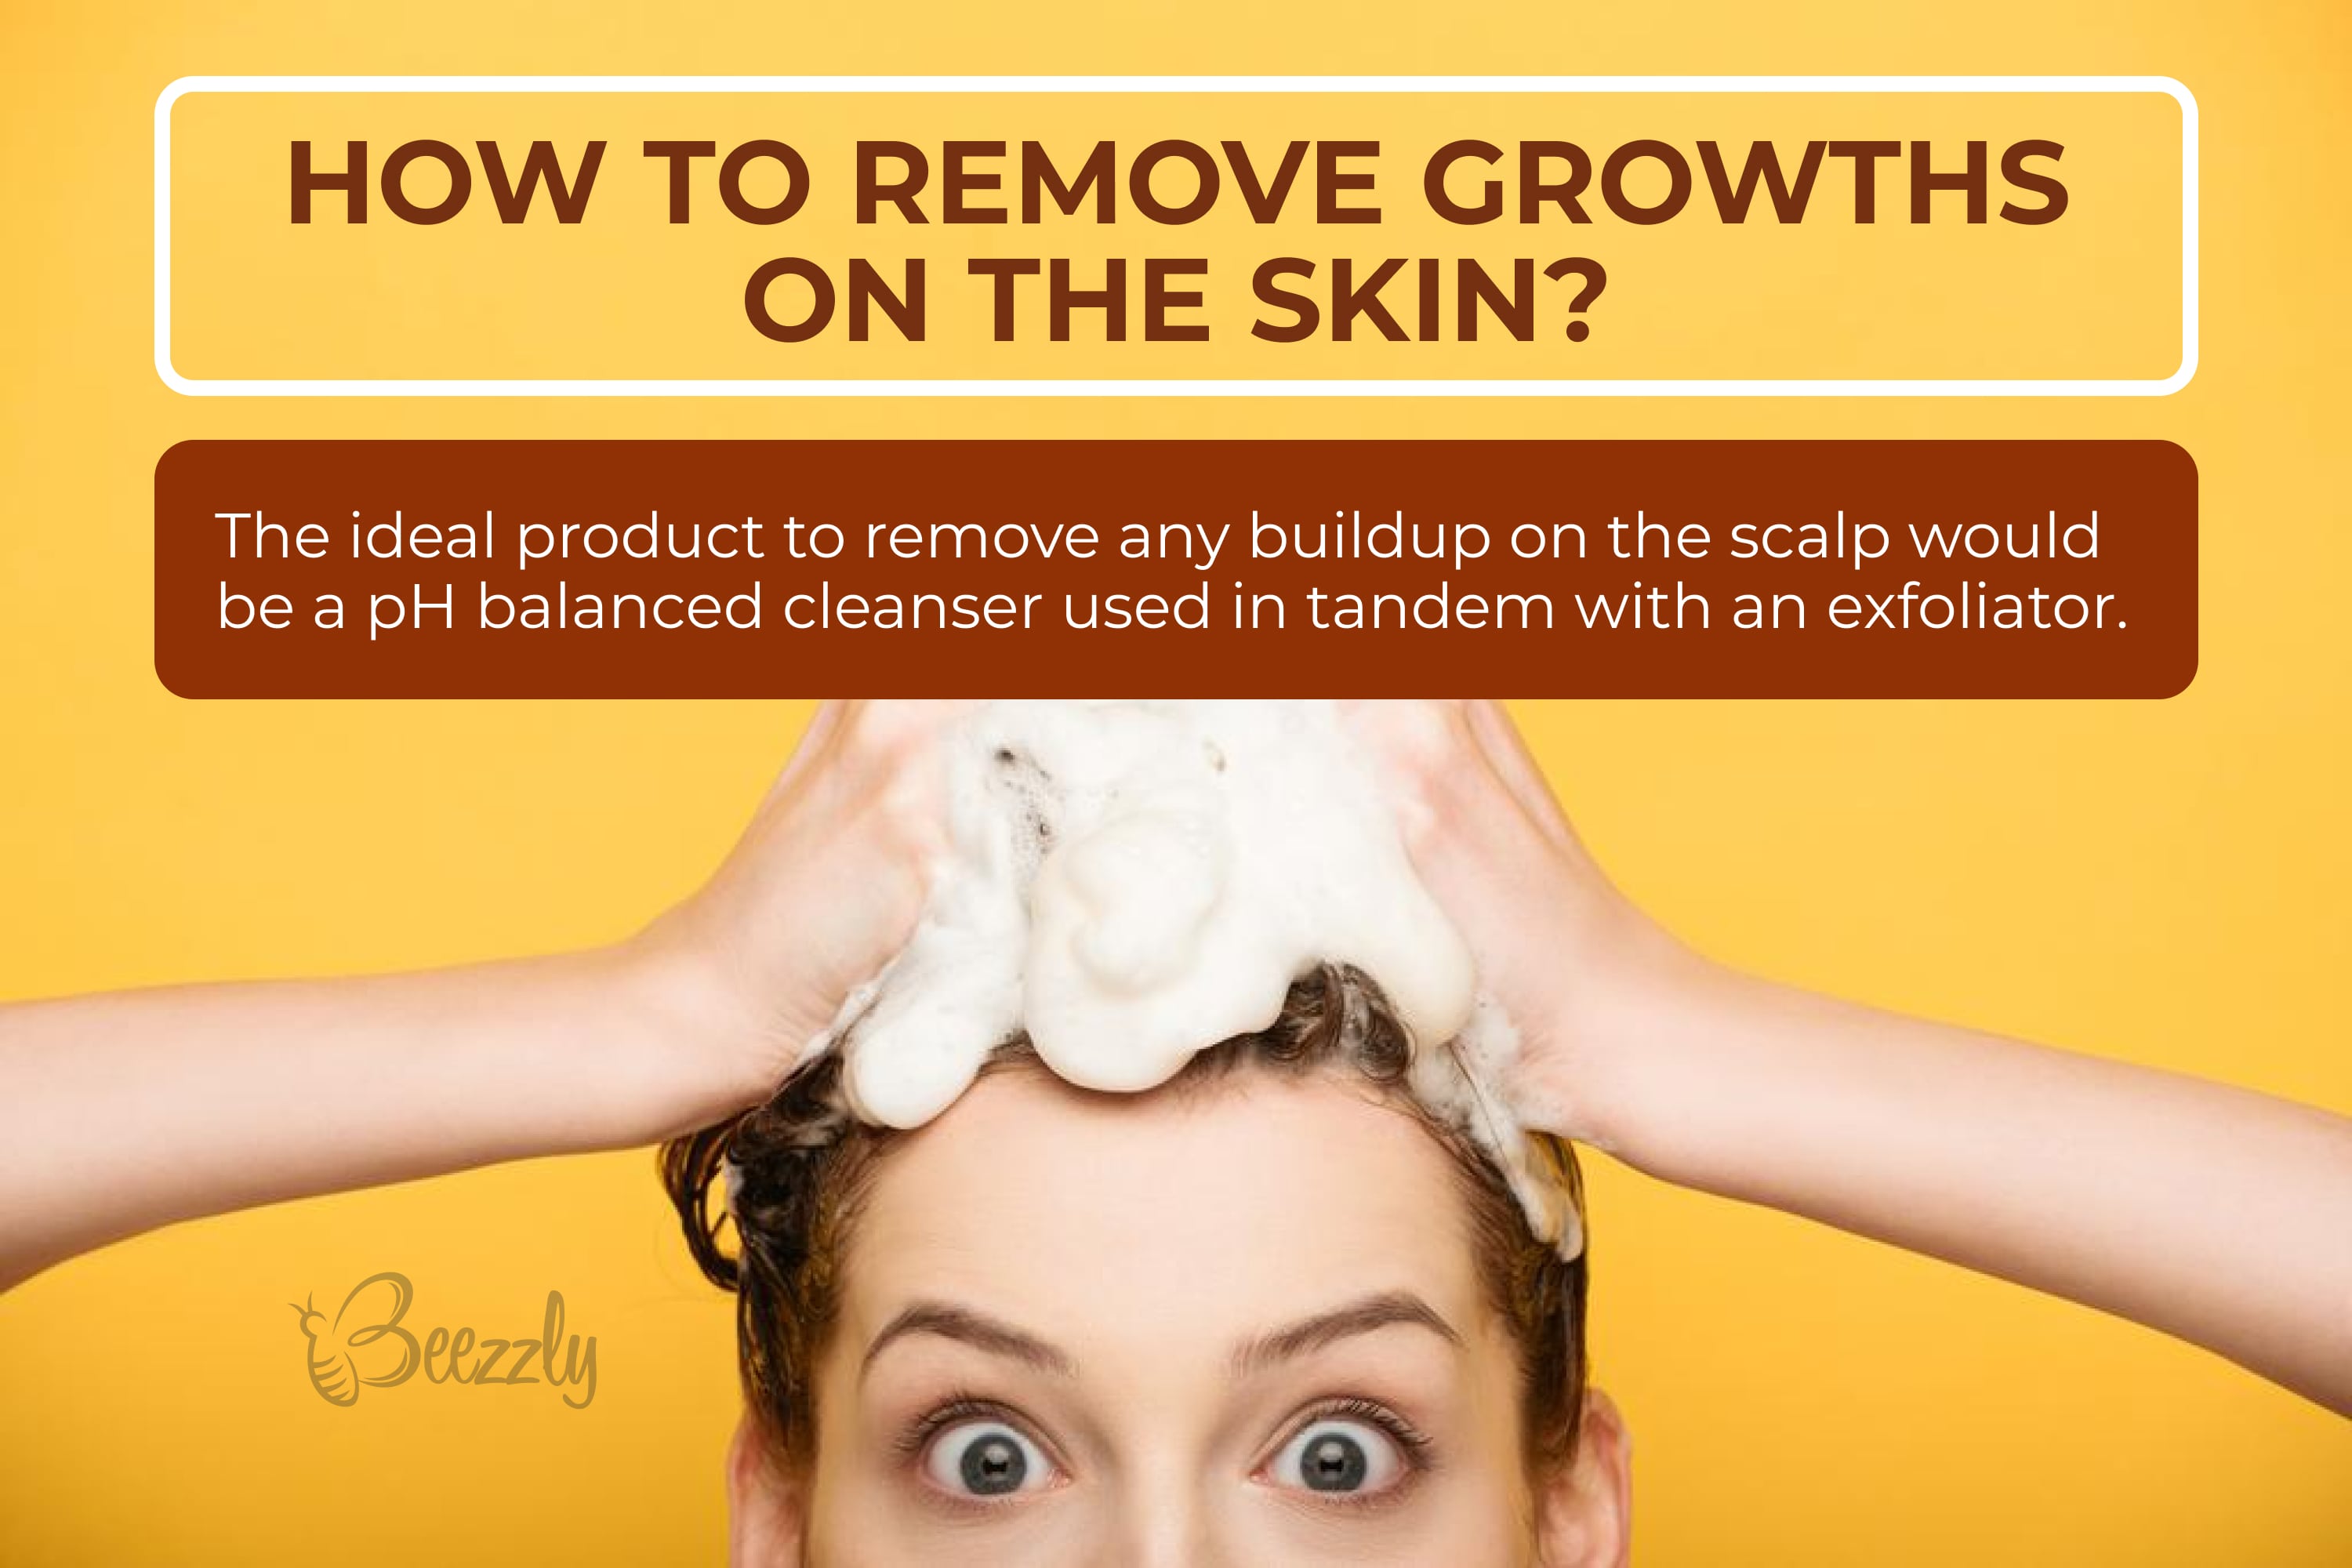 How to remove growths on the skin